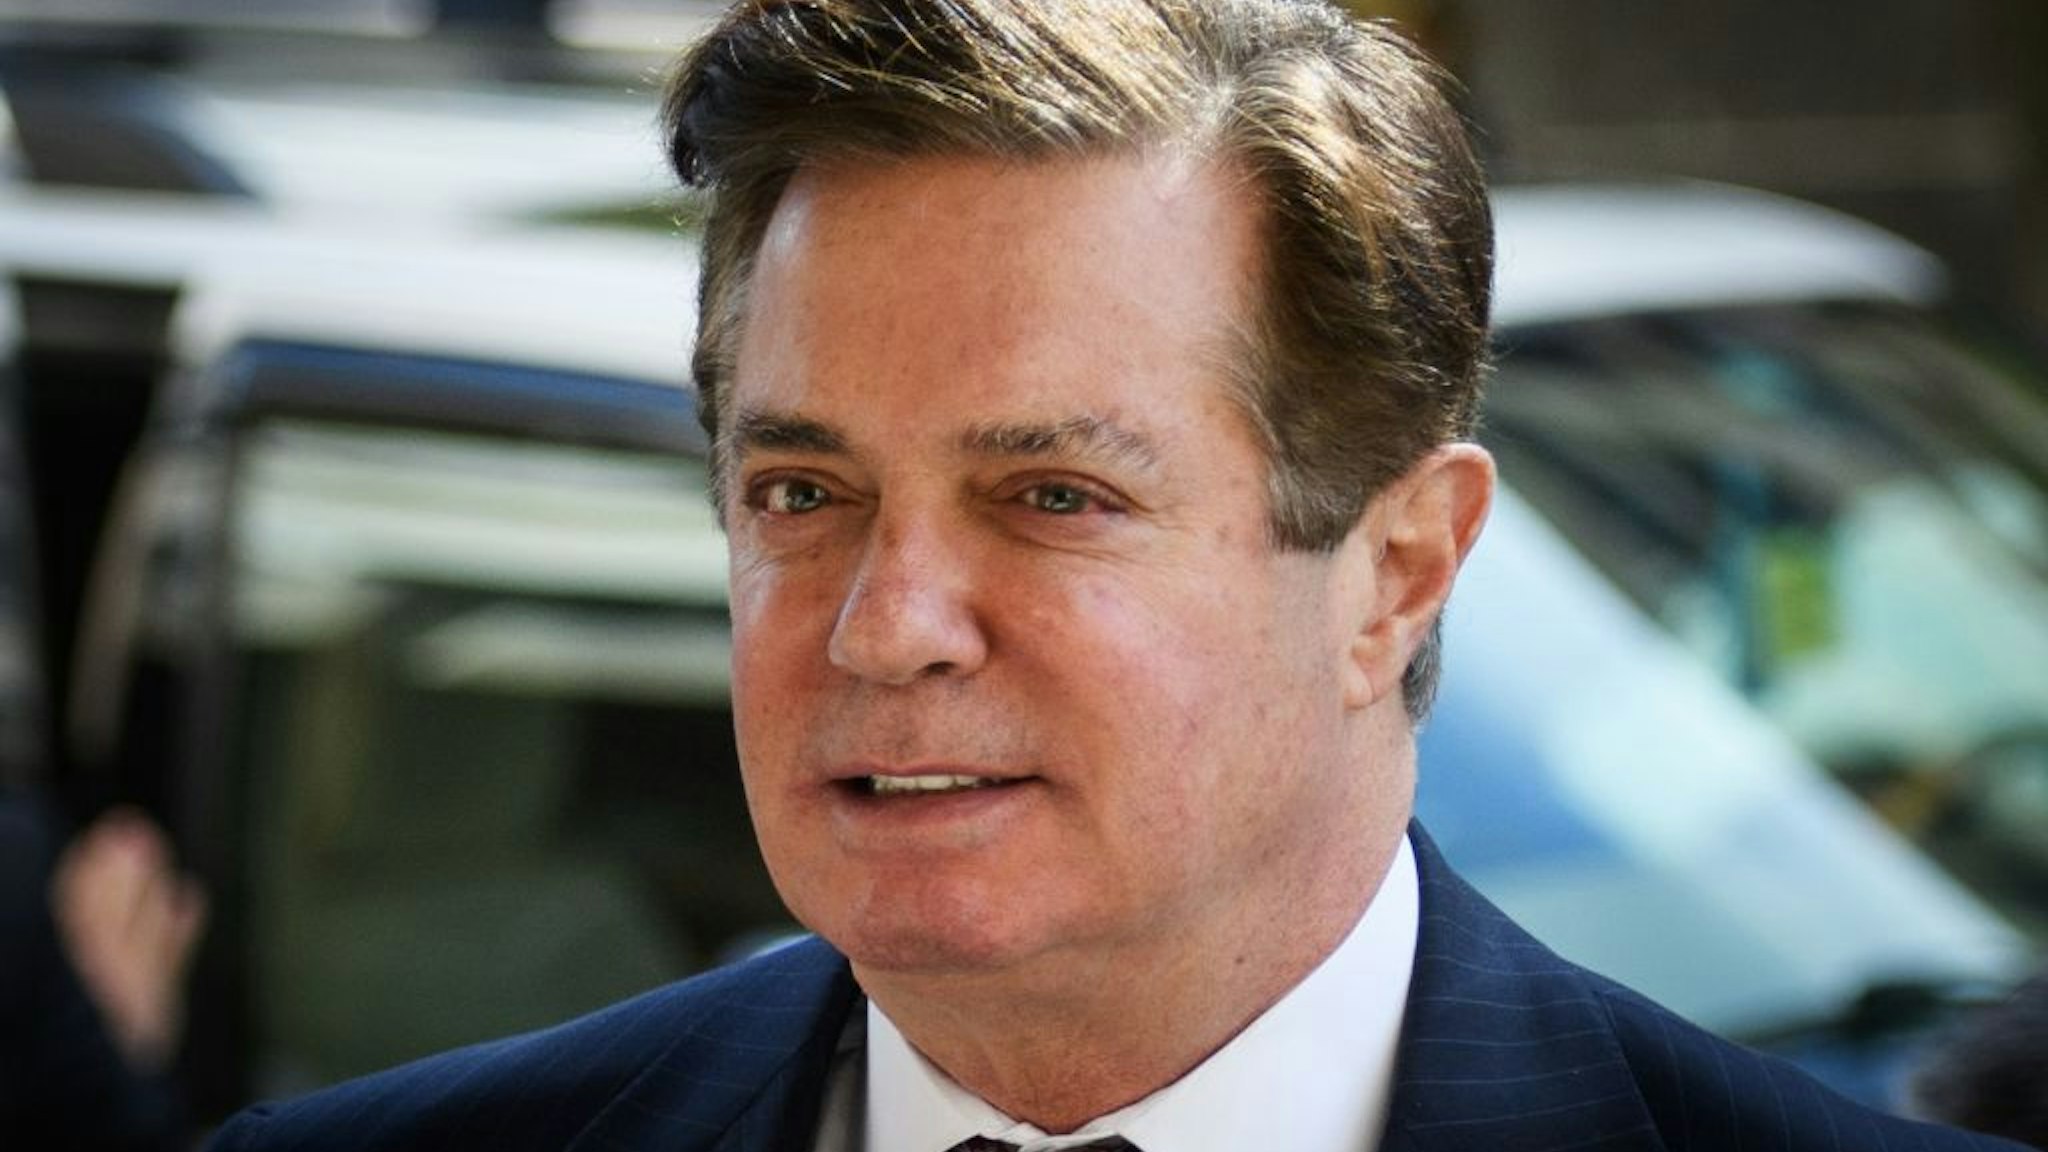 Paul Manafort arrives for a hearing at US District Court on June 15, 2018 in Washington, DC.